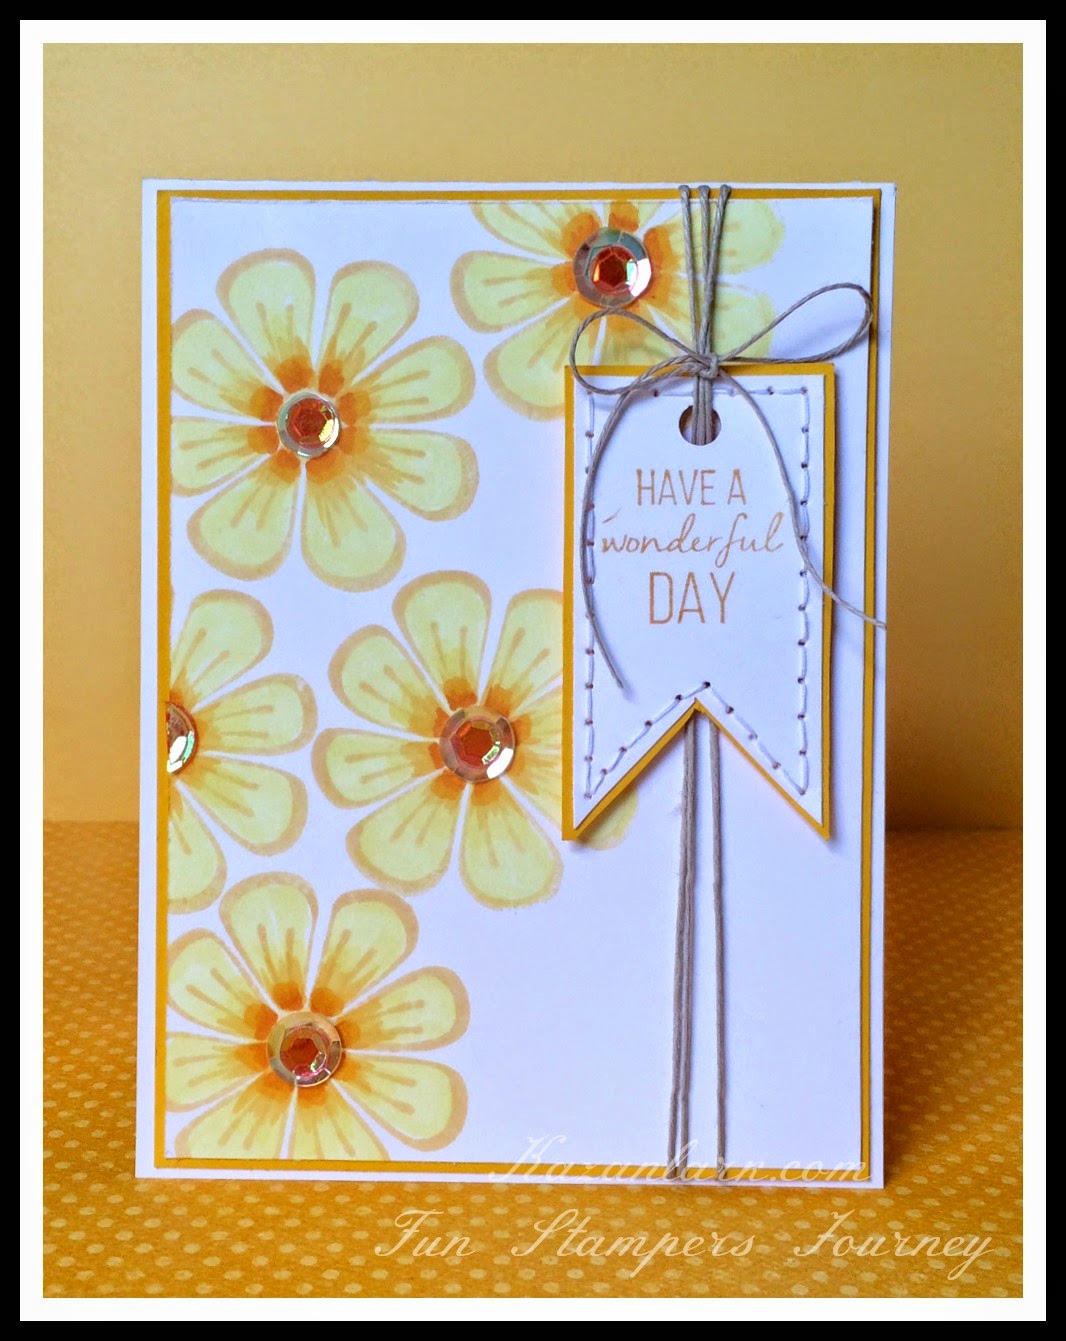 Kazan Clark: Fun Stampers Journey Mother's Day Card